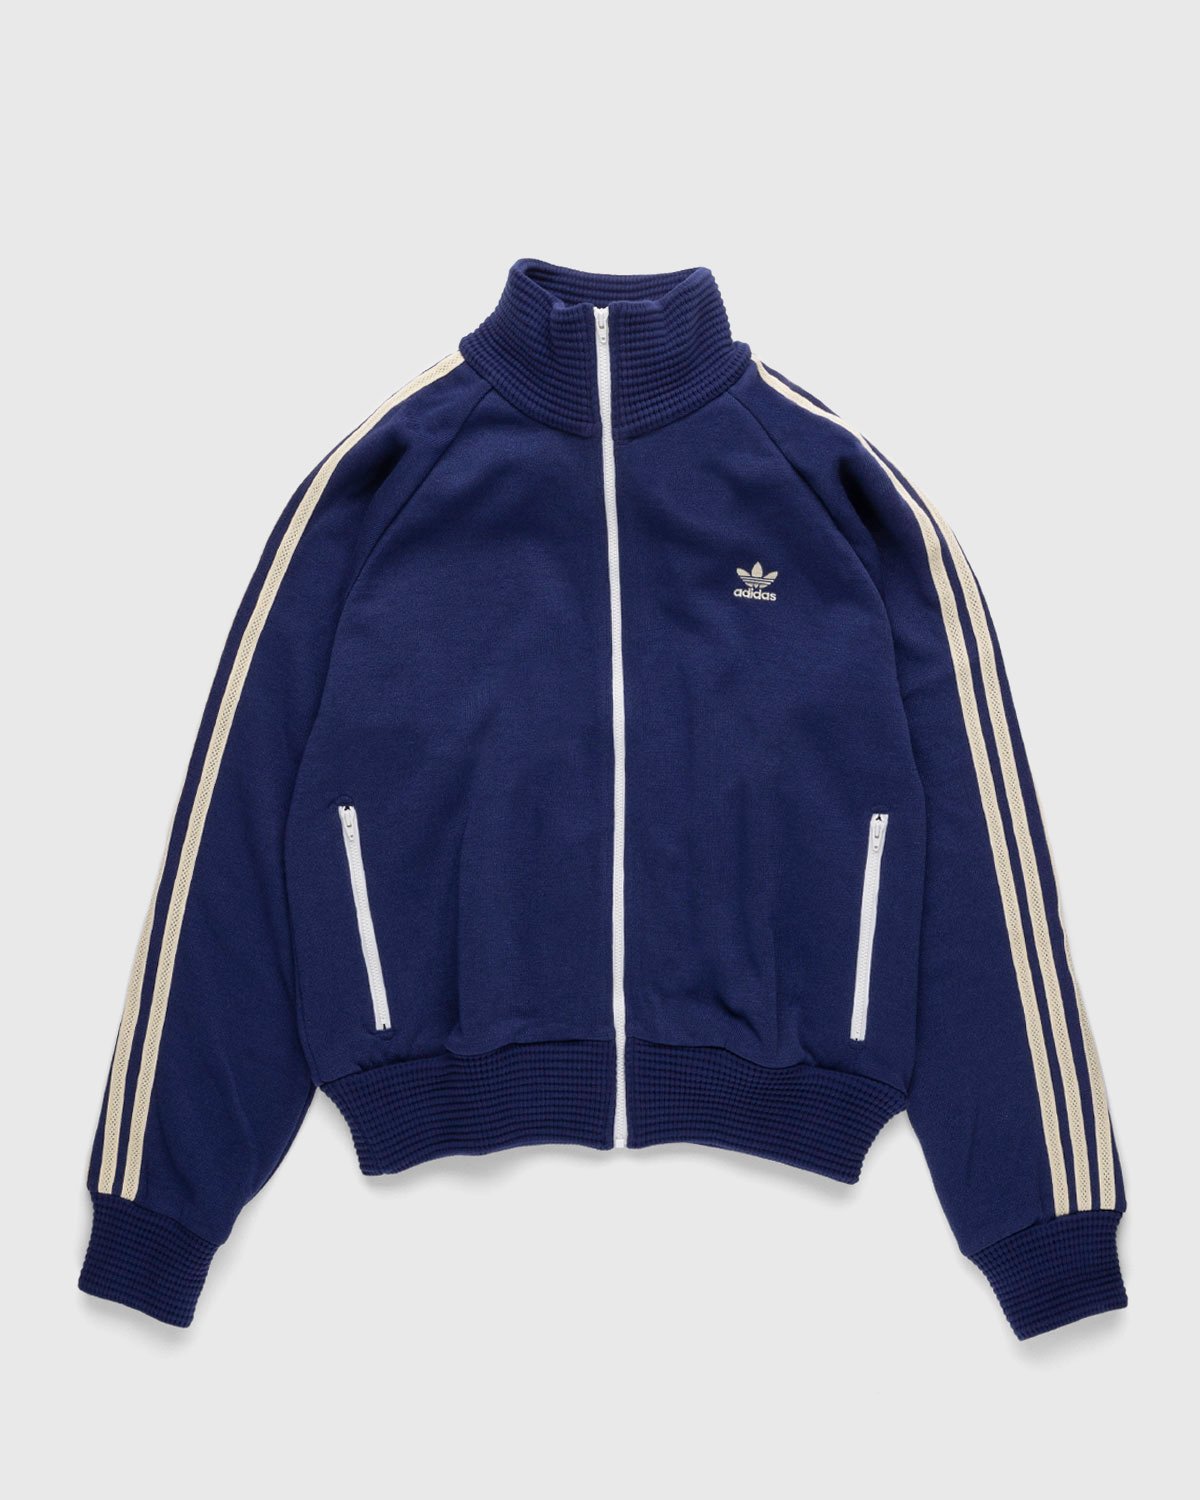 Adidas x Wales Bonner - 80s Track Top Night Sky - Clothing - Blue - Image 1